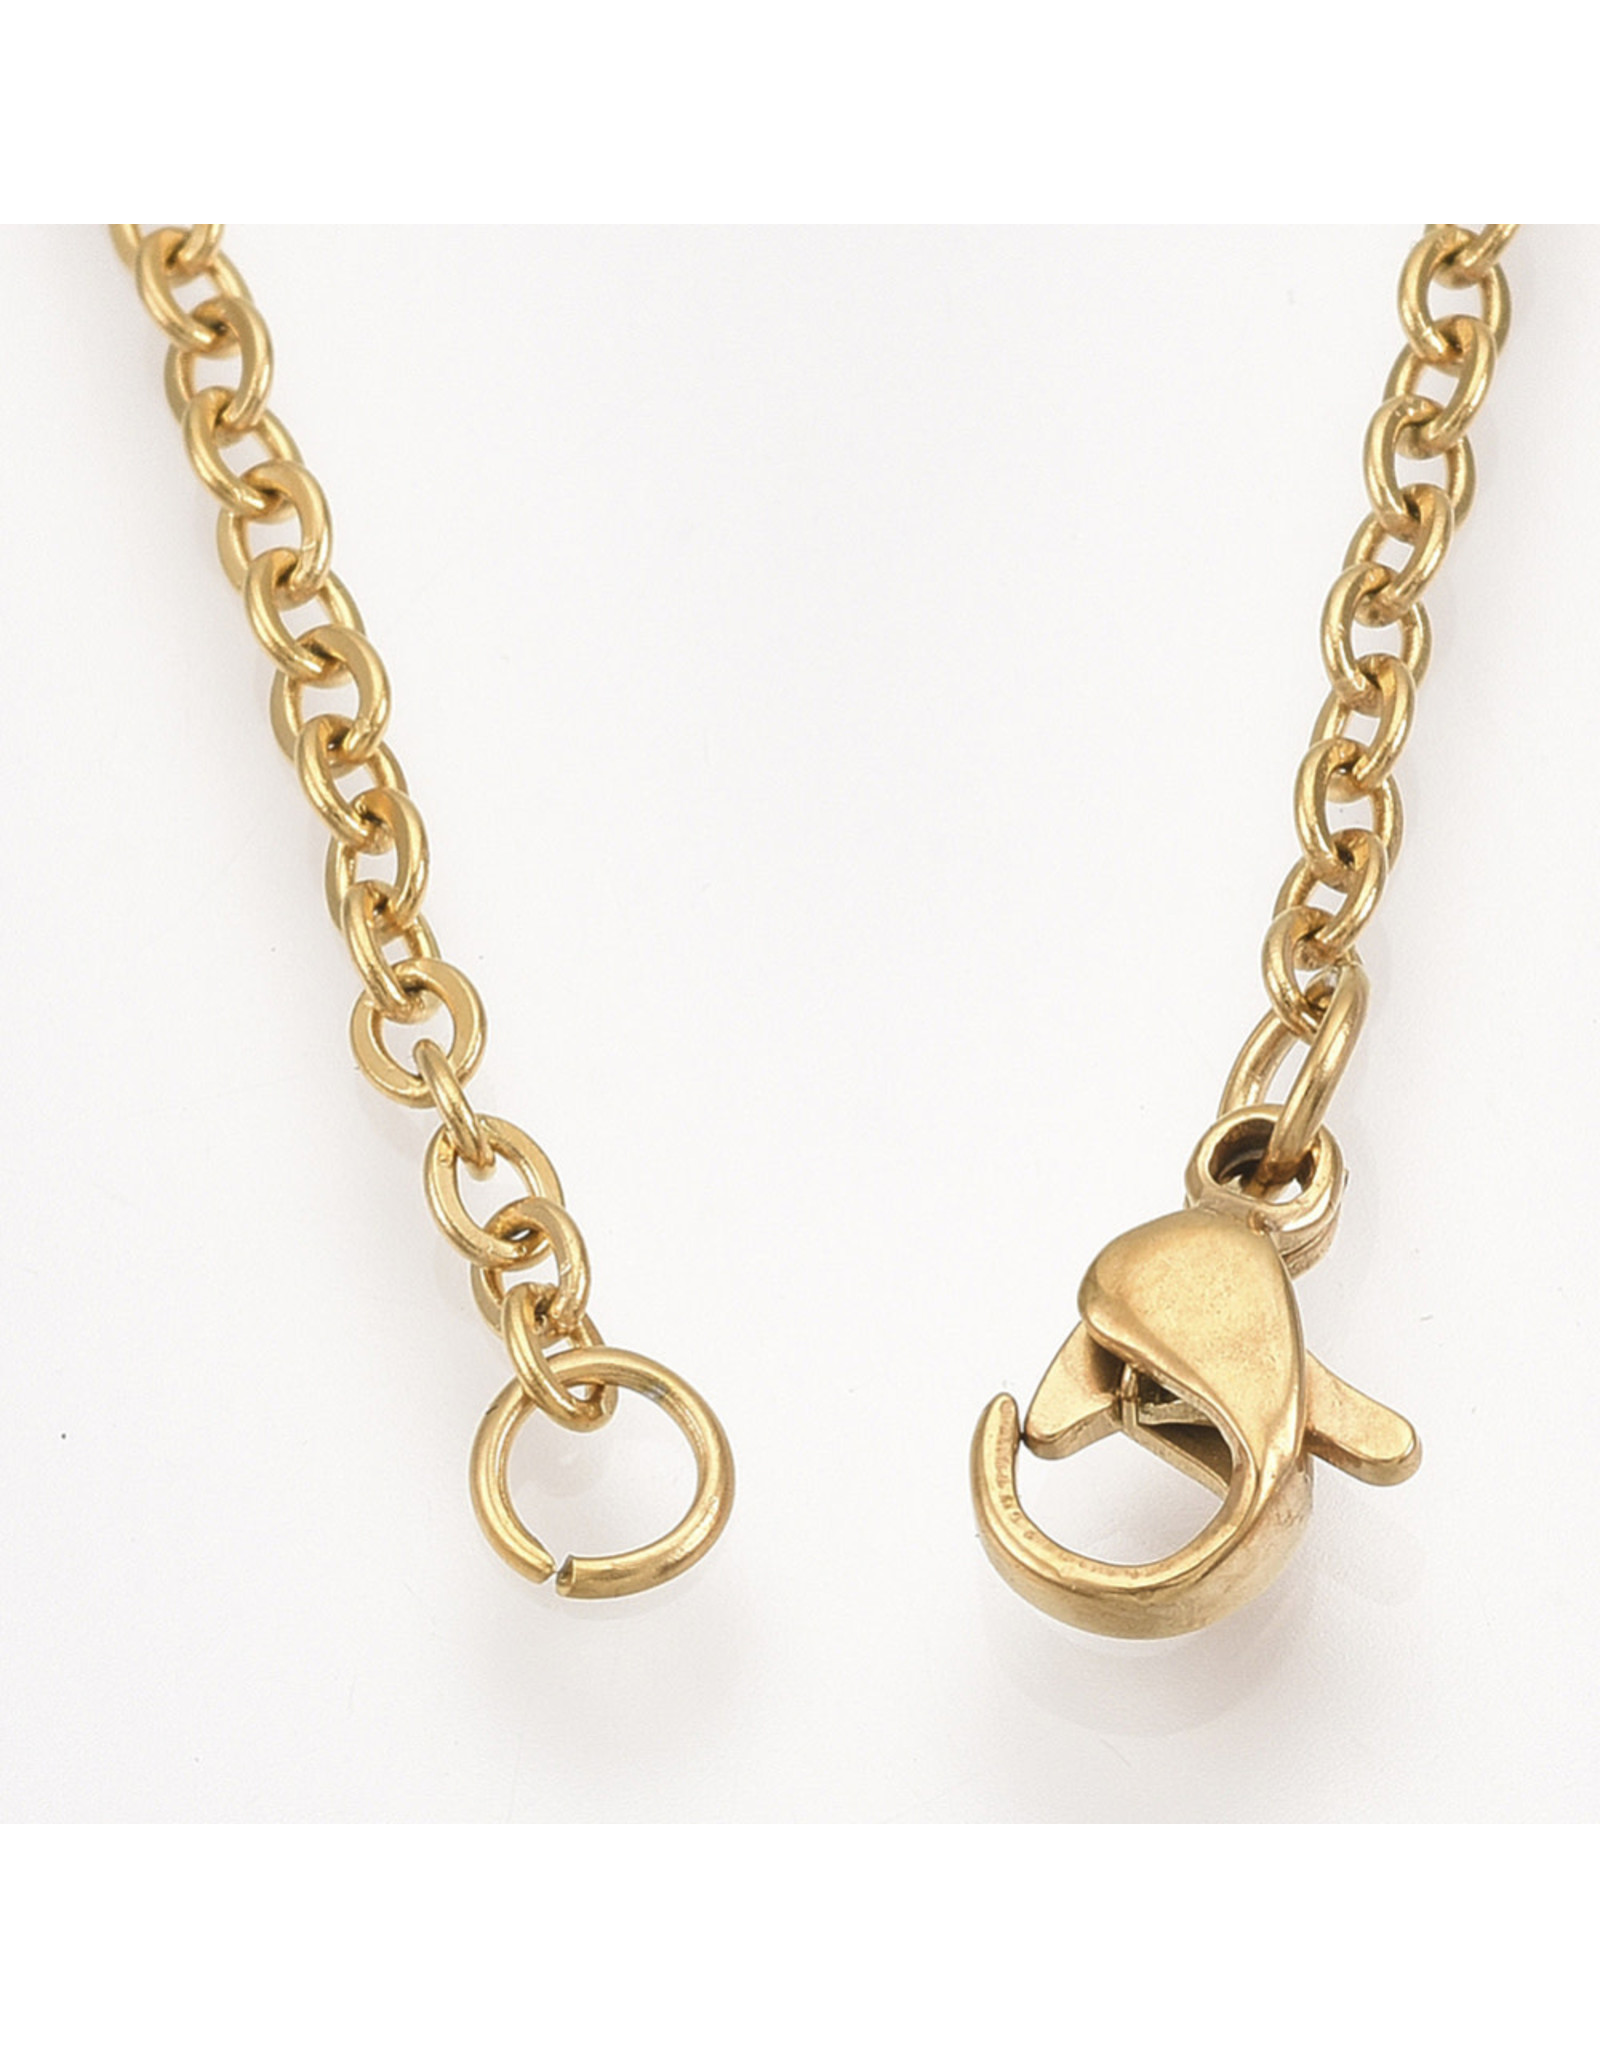 Bee  Necklace Stainless Steel  Gold 25x39mm  17'' x1